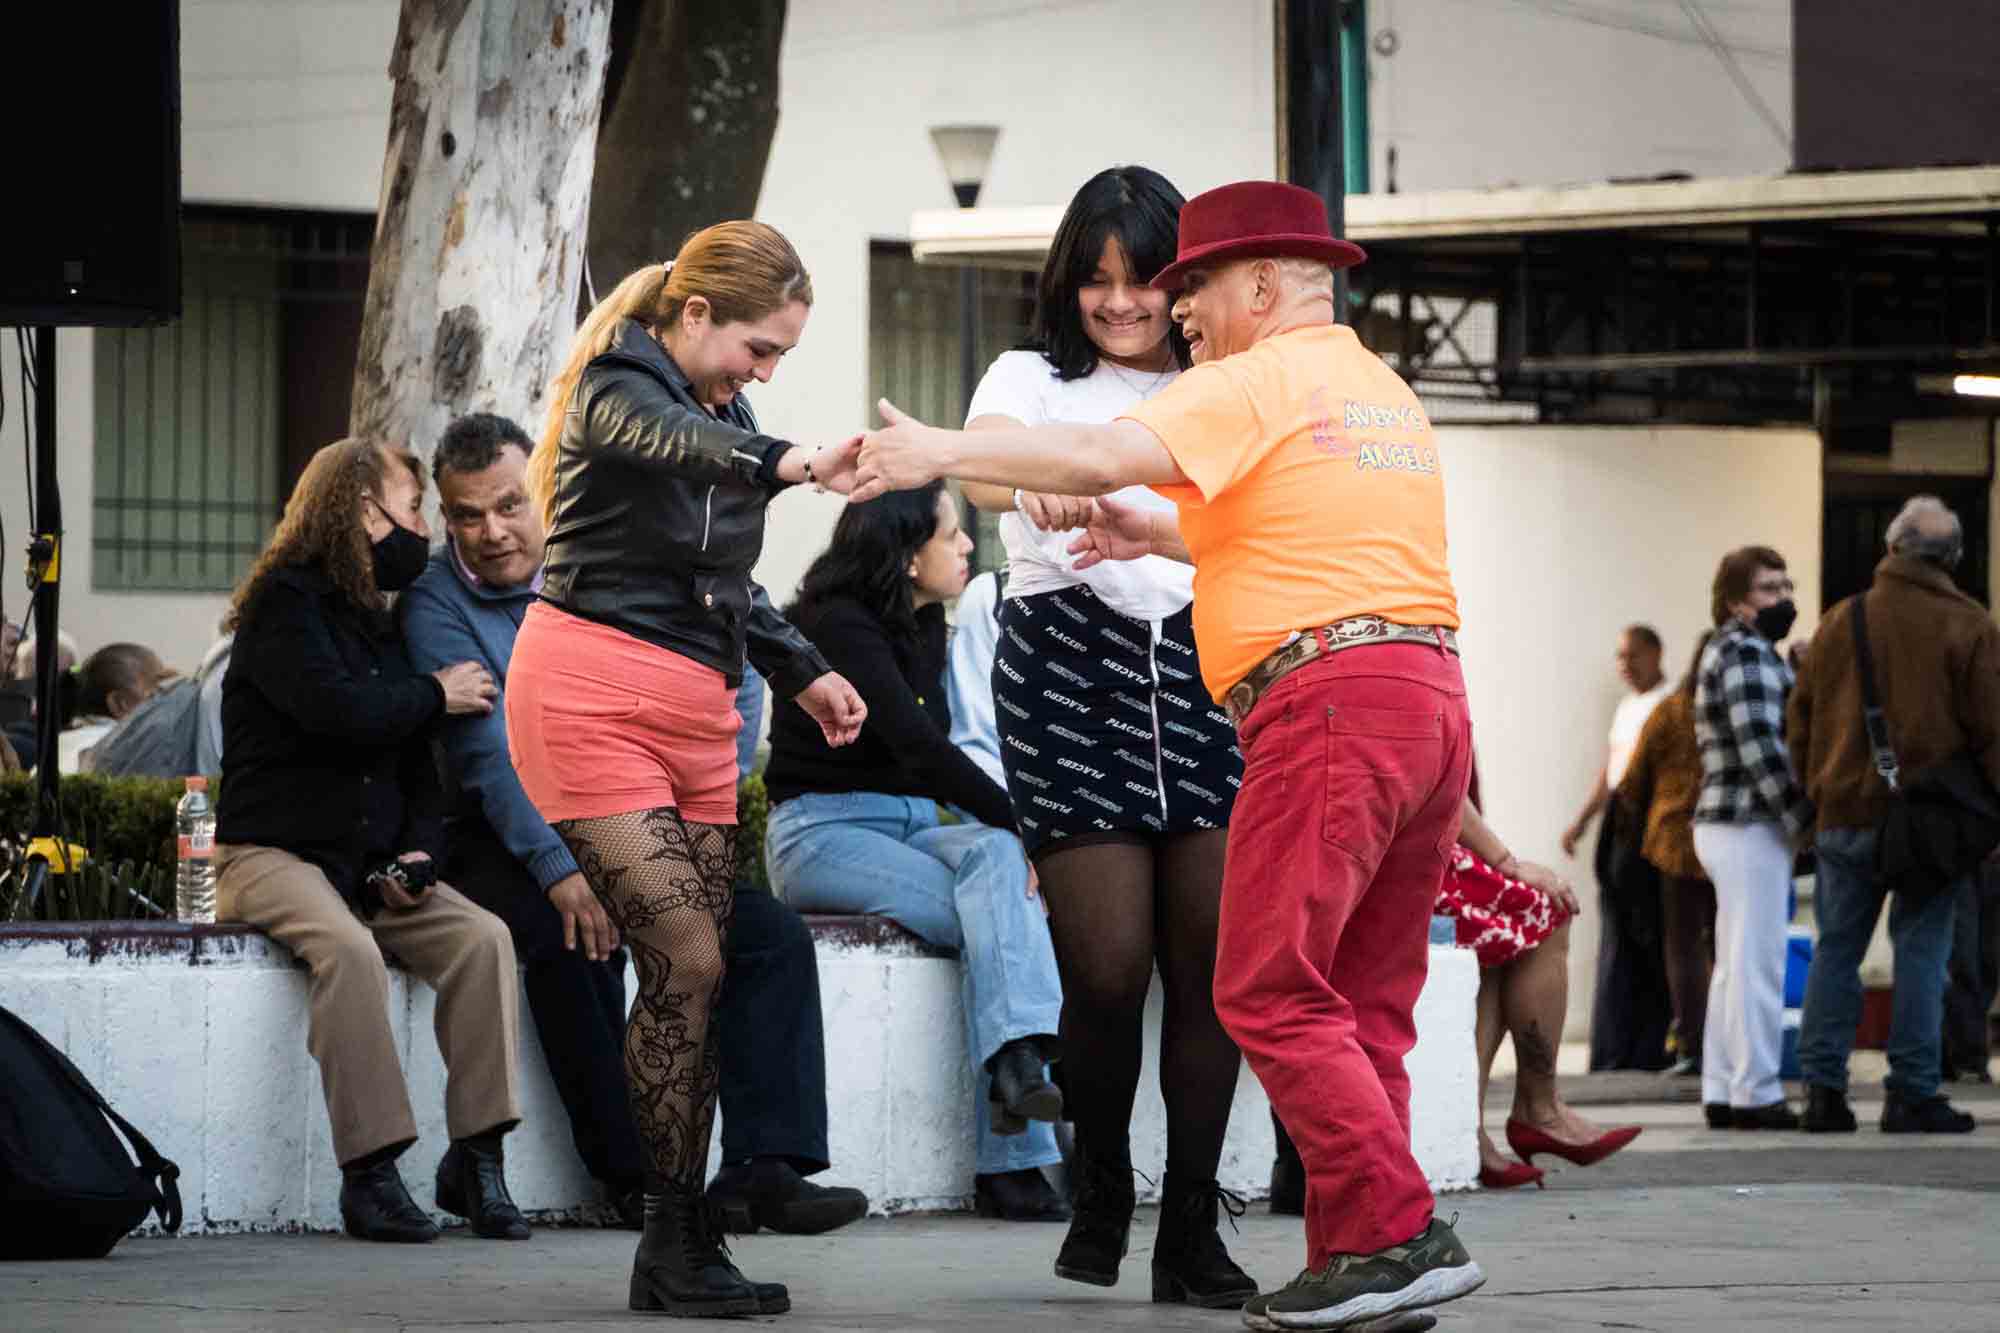 A man and two women dance on the sidewalk in Mexico City